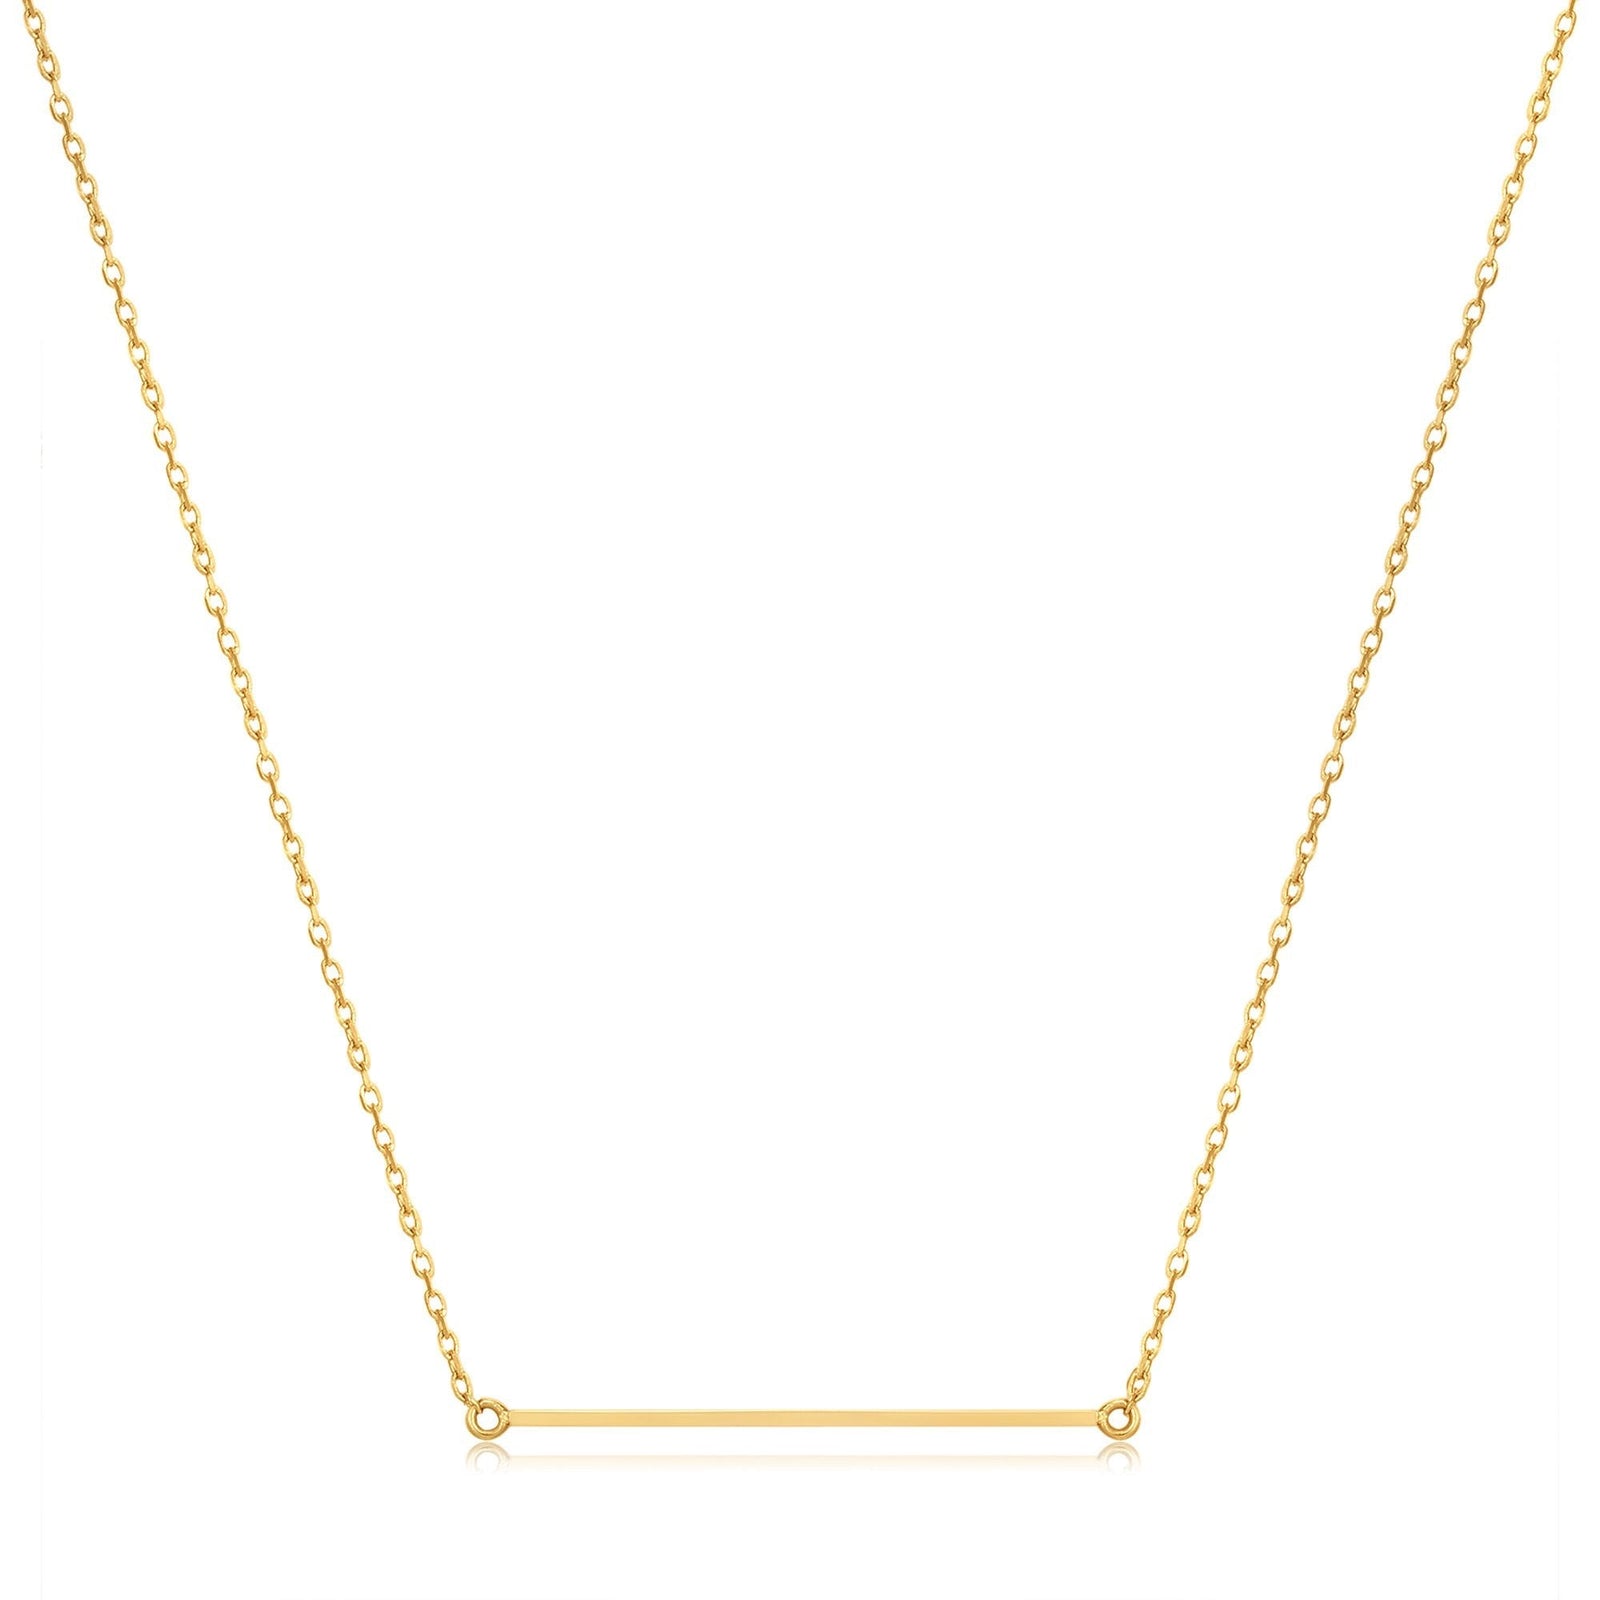 Ania Haie 14kt Gold Solid Bar Necklace